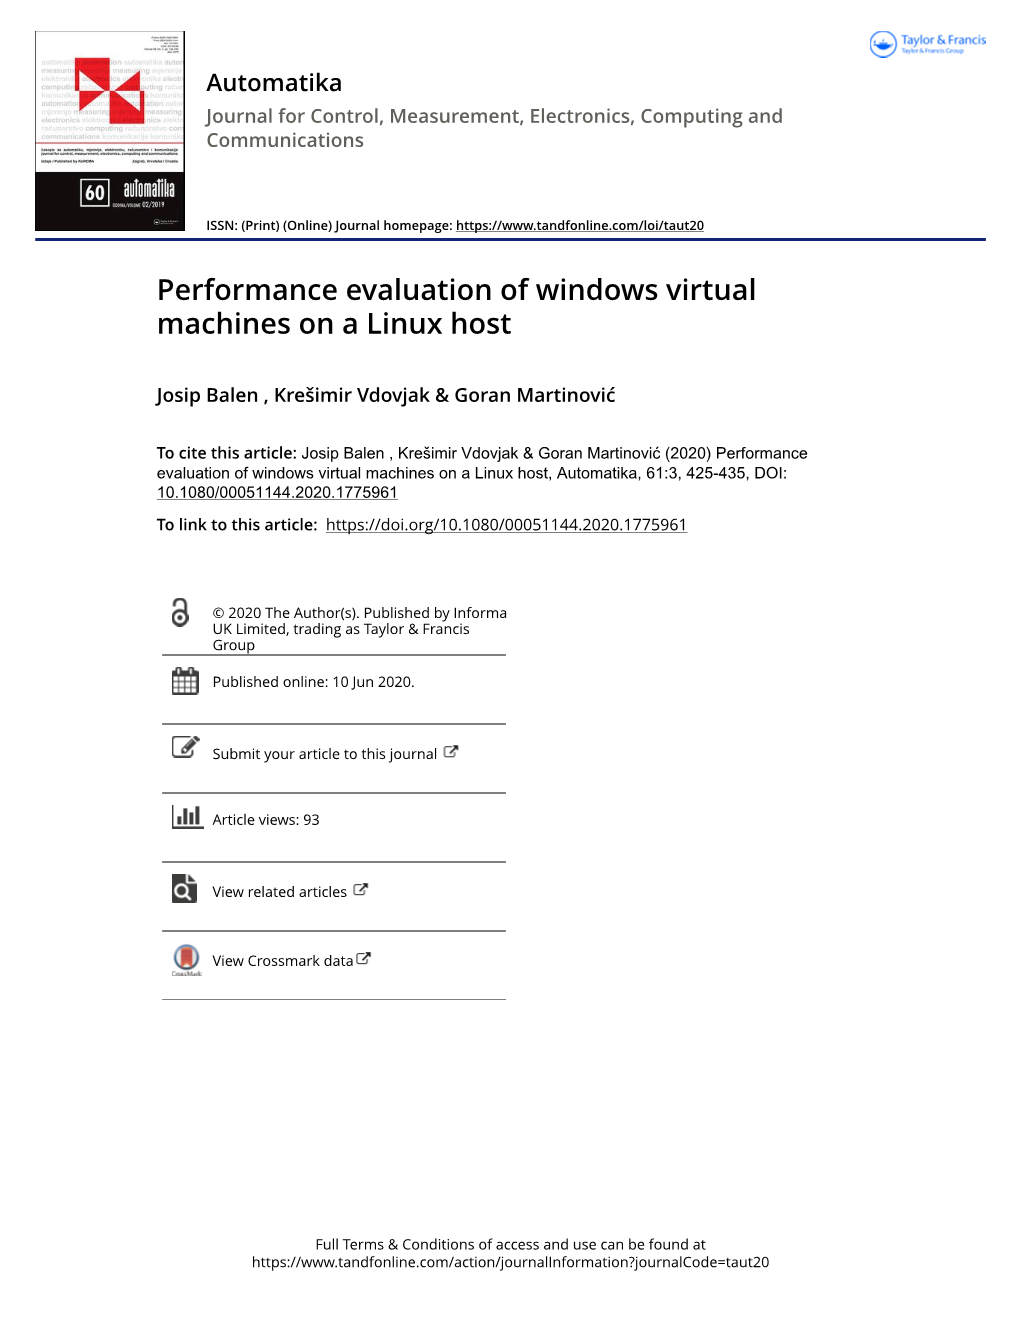 Performance Evaluation of Windows Virtual Machines on a Linux Host